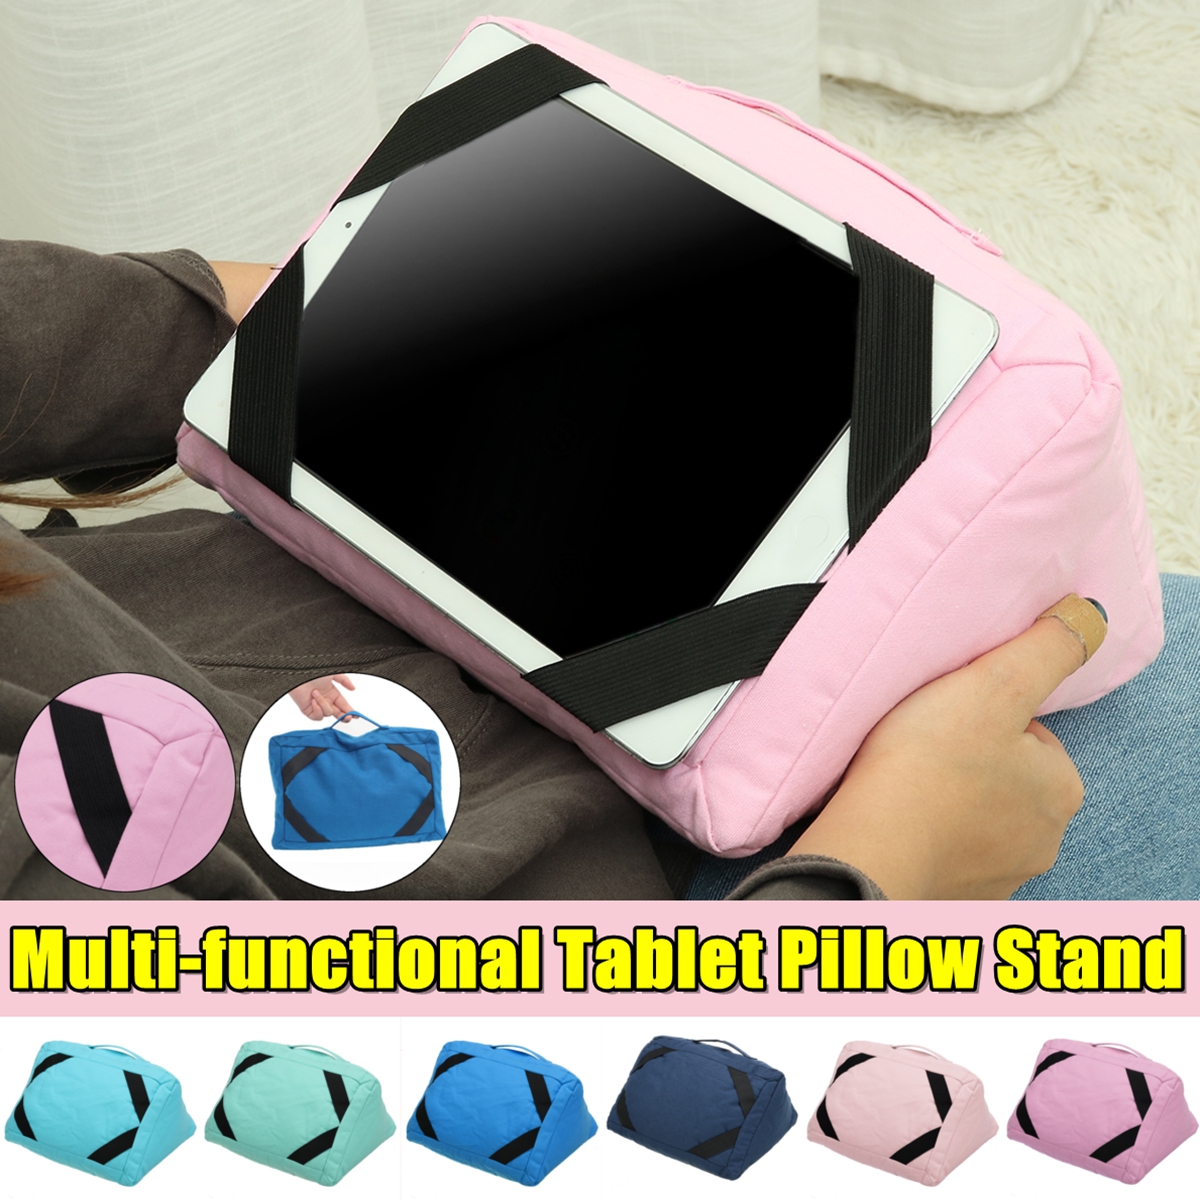 Pillow-Holder-Tablet-Smartphone-Holder-Soft-Pillow-Cushion-Soft-Tablet-Stand-For-Home-Decoration-1827877-3